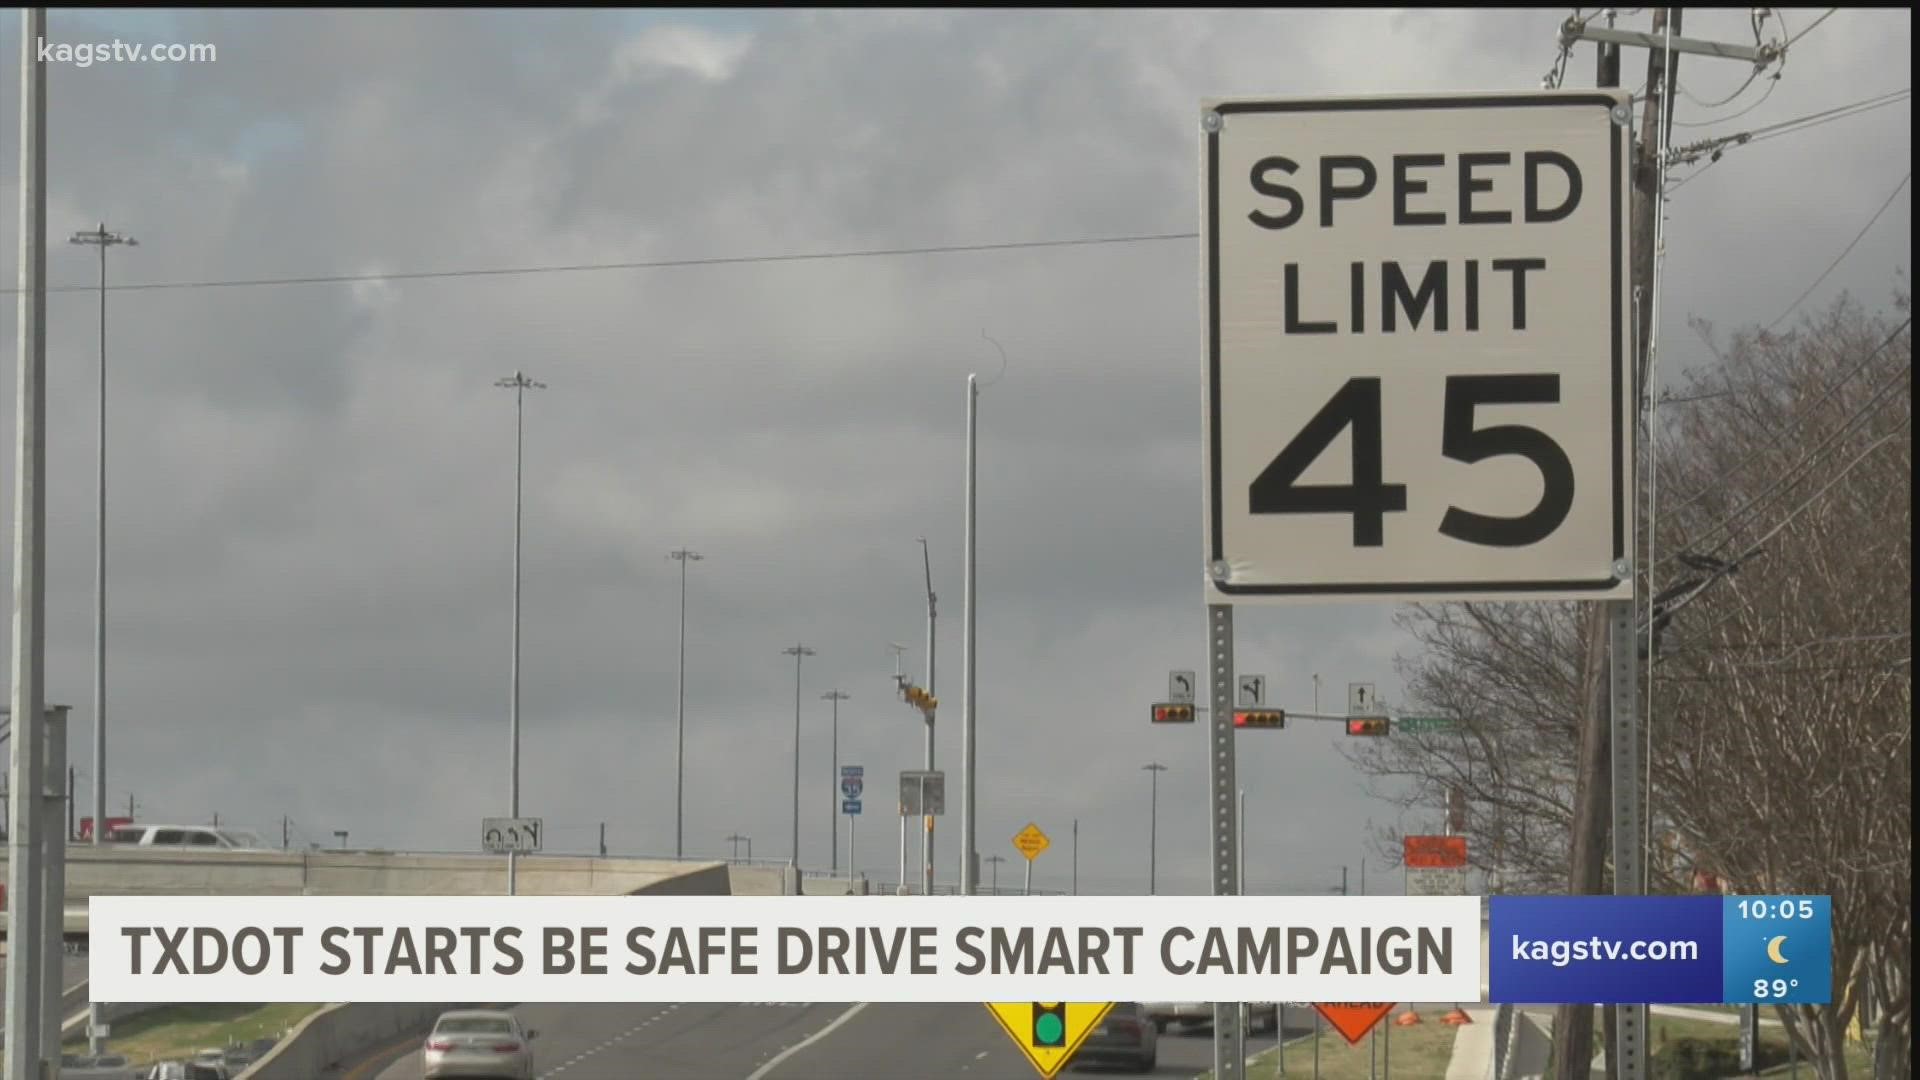 TxDOT wants you to slow down on the road to prevent deaths and crashes on Texas roads.